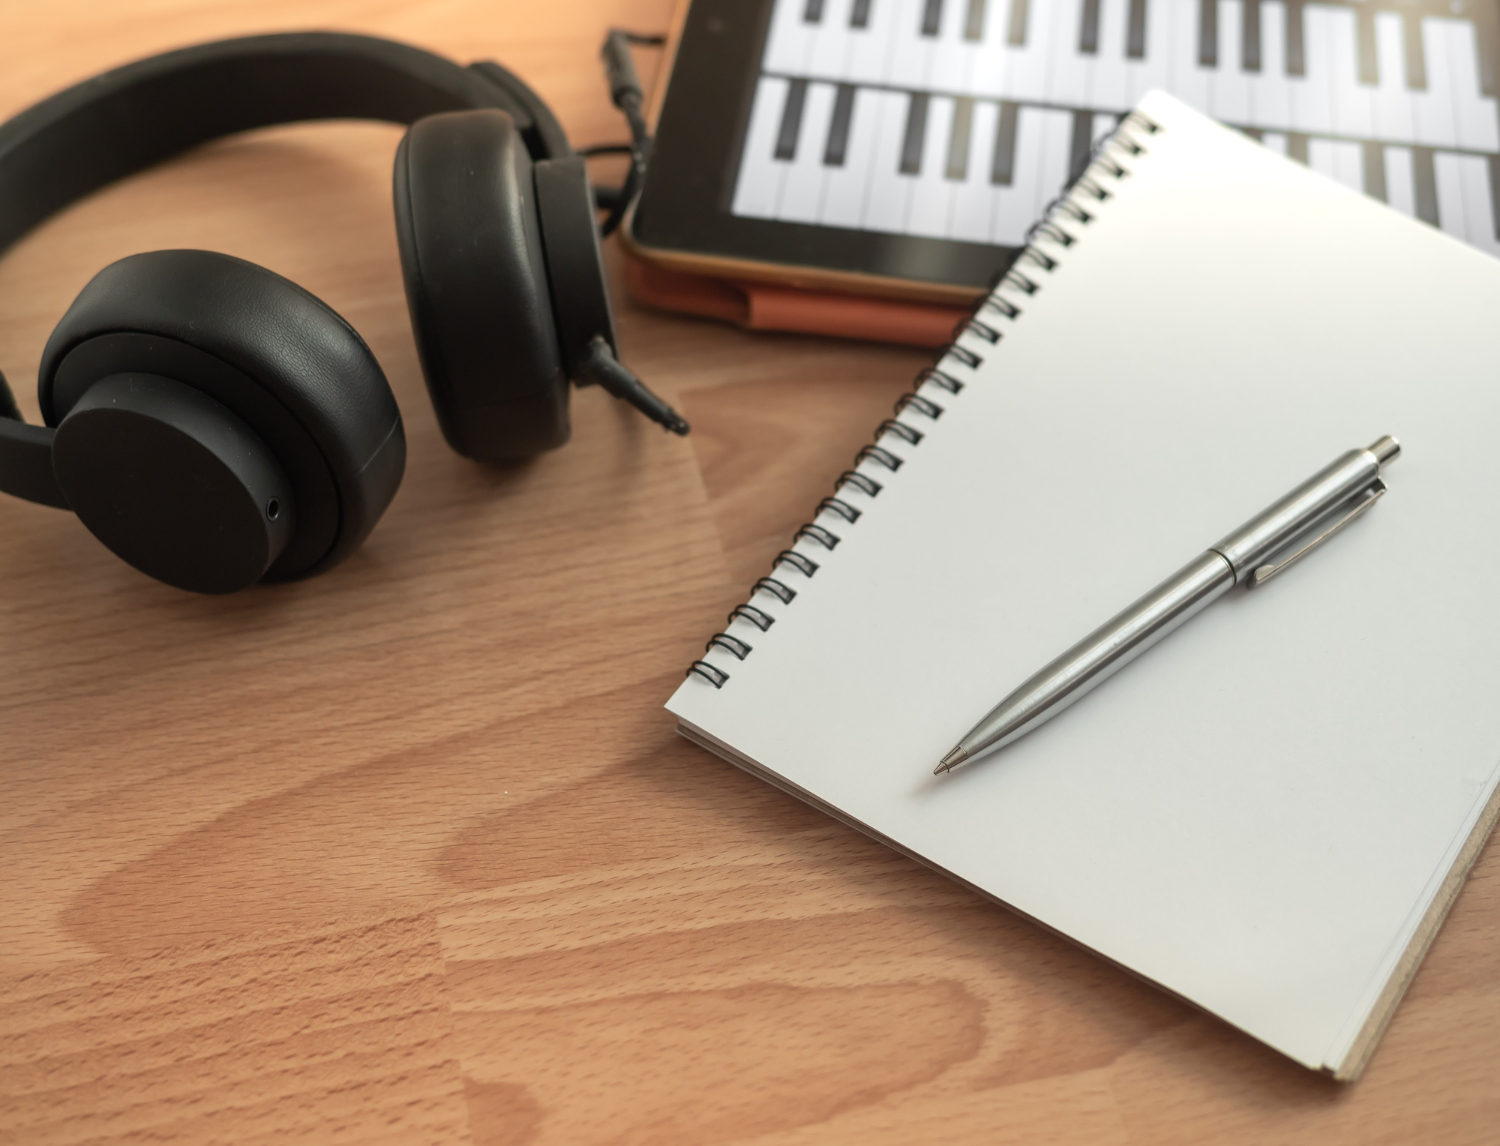 song writing headphones notepad piano and pen on table